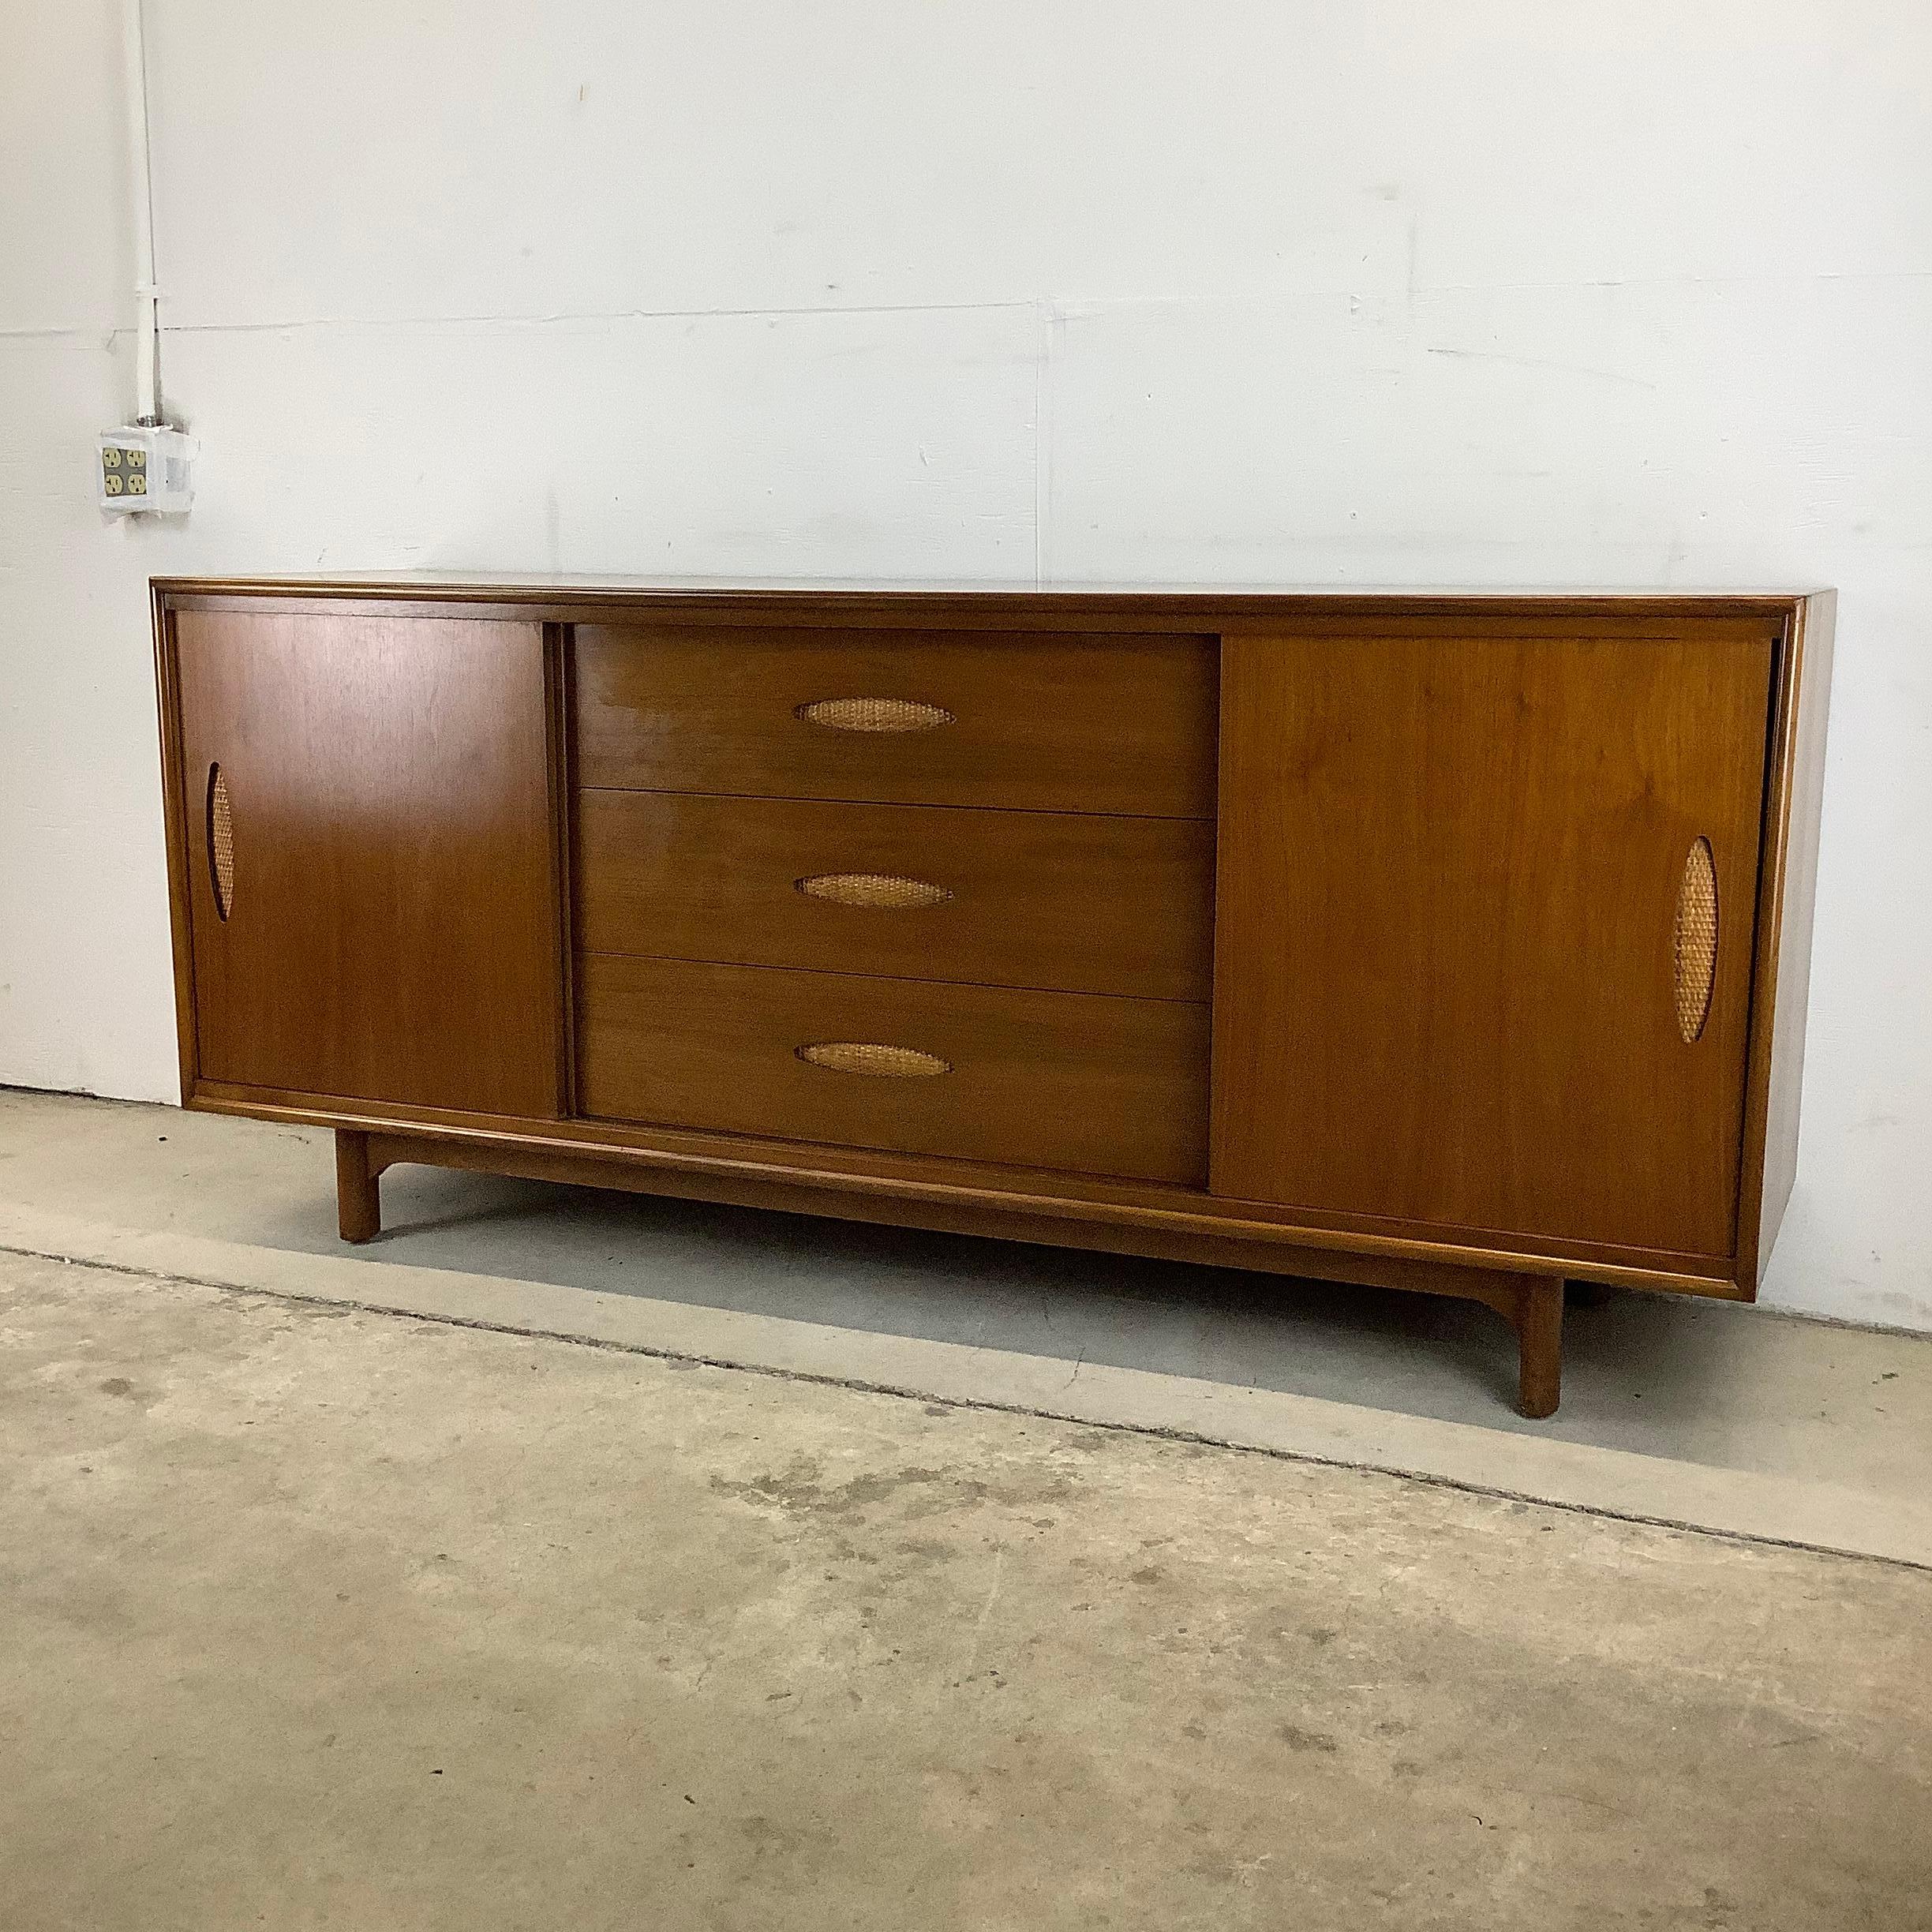 This larger scale Mid-Century Modern bedroom dresser from Cavalier furniture features a vintage walnut finish with cane front detail, heavy construction, and clean modern lines. The substantial Size and quality construction but MCM manufacturer